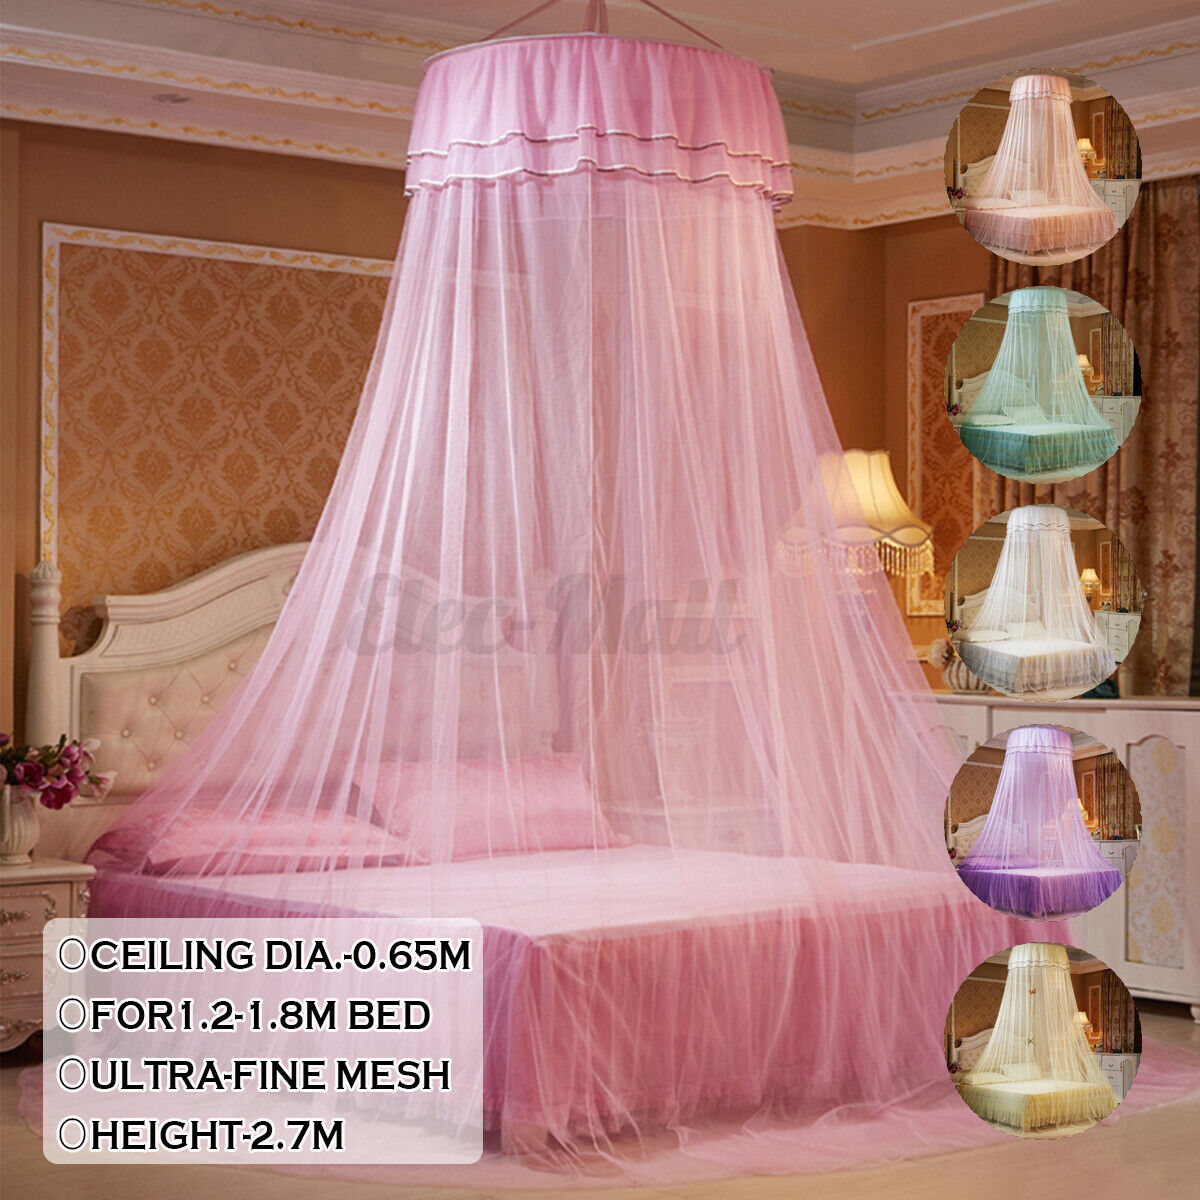 Elegant Mosquito Net Queen Size Home Bedding Lace Canopy Net